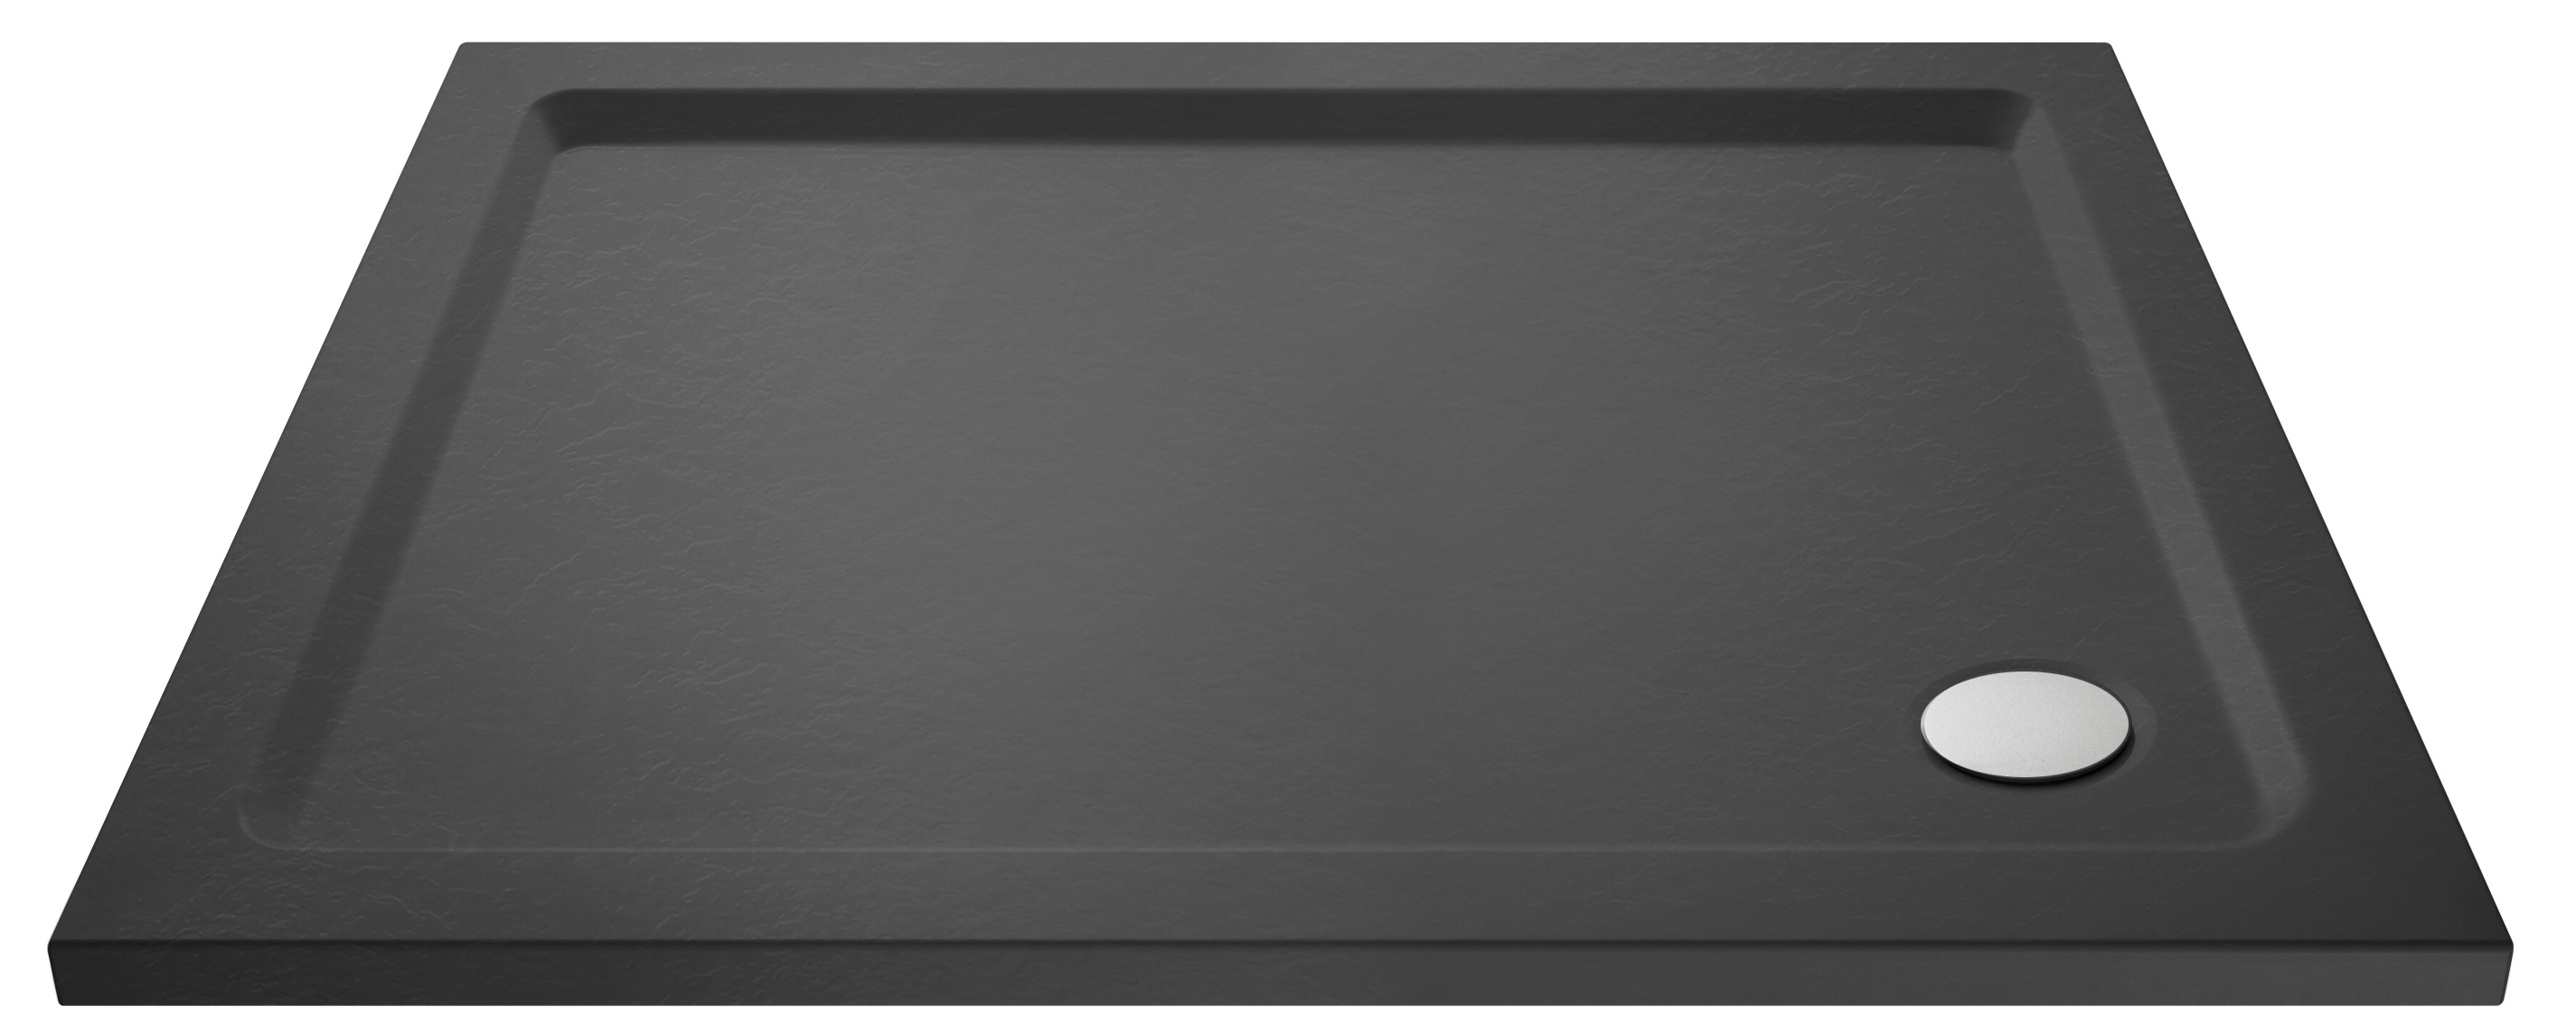 Nuie Slate Grey Trays Contemporary Rectangular Shower Tray 1100x700mm - TR71011 